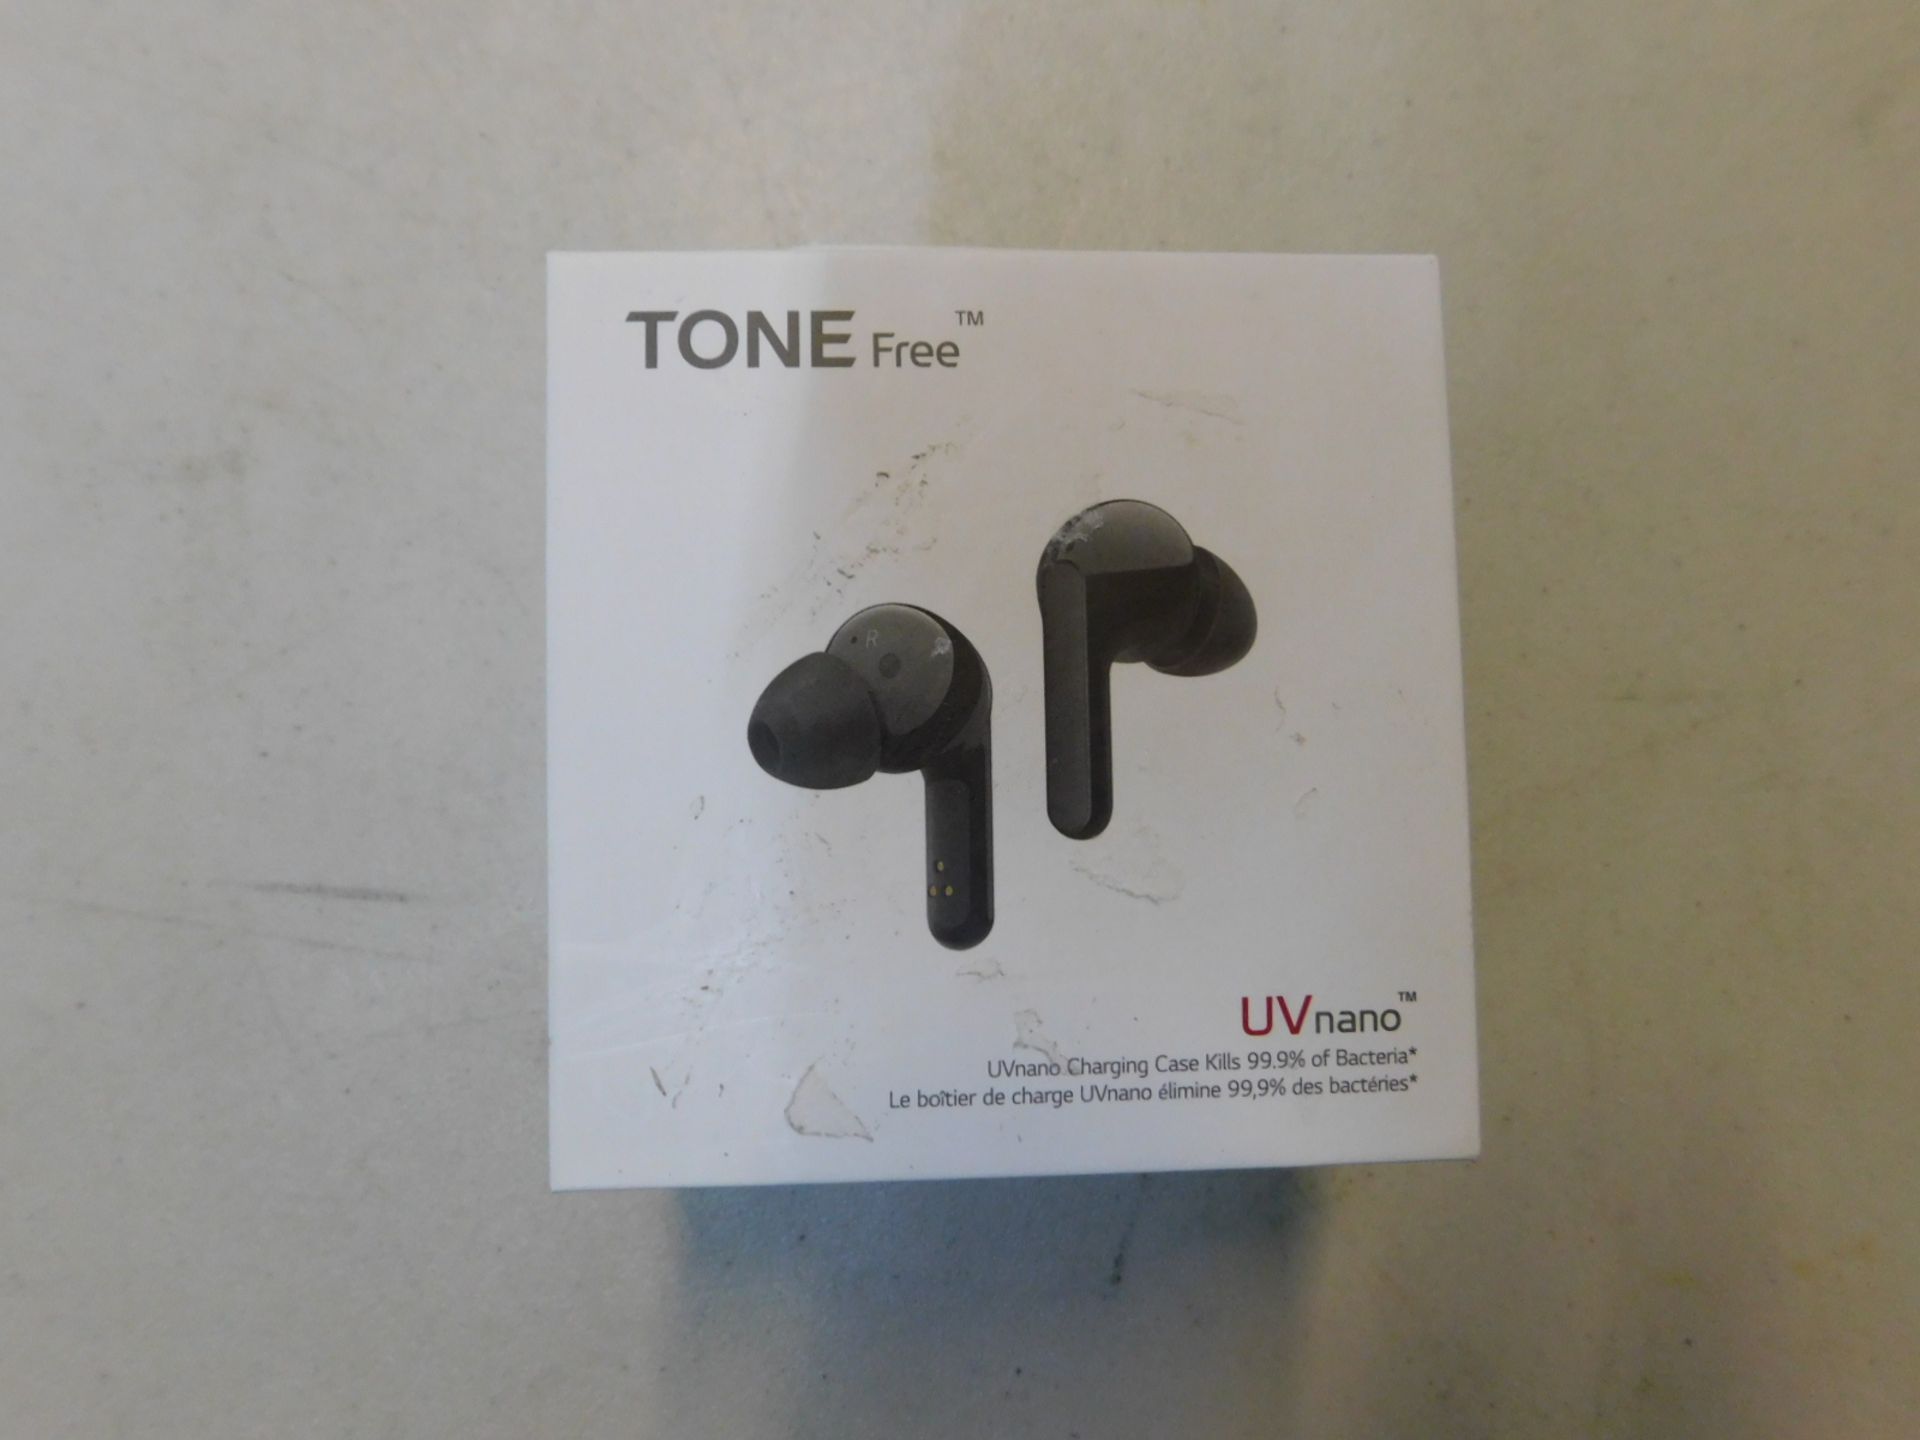 1 BOXED LG TONE FREE EARPHONES WITH MERIDIAN TECHNOLOGY MODEL HBS-FN6 RRP Â£119.99